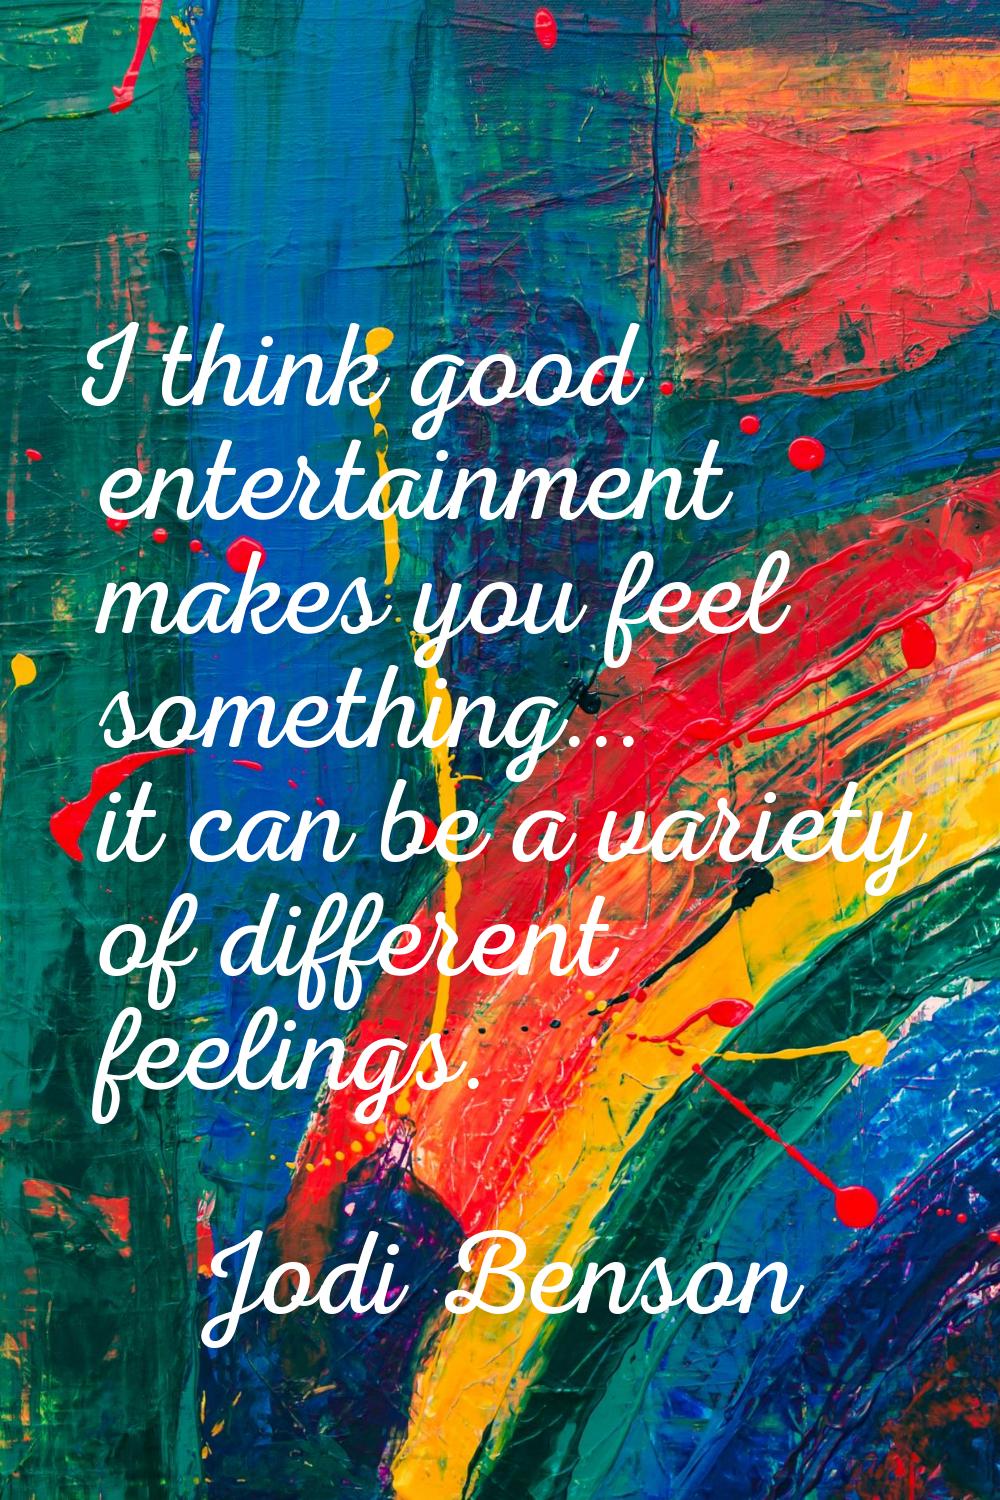 I think good entertainment makes you feel something... it can be a variety of different feelings.